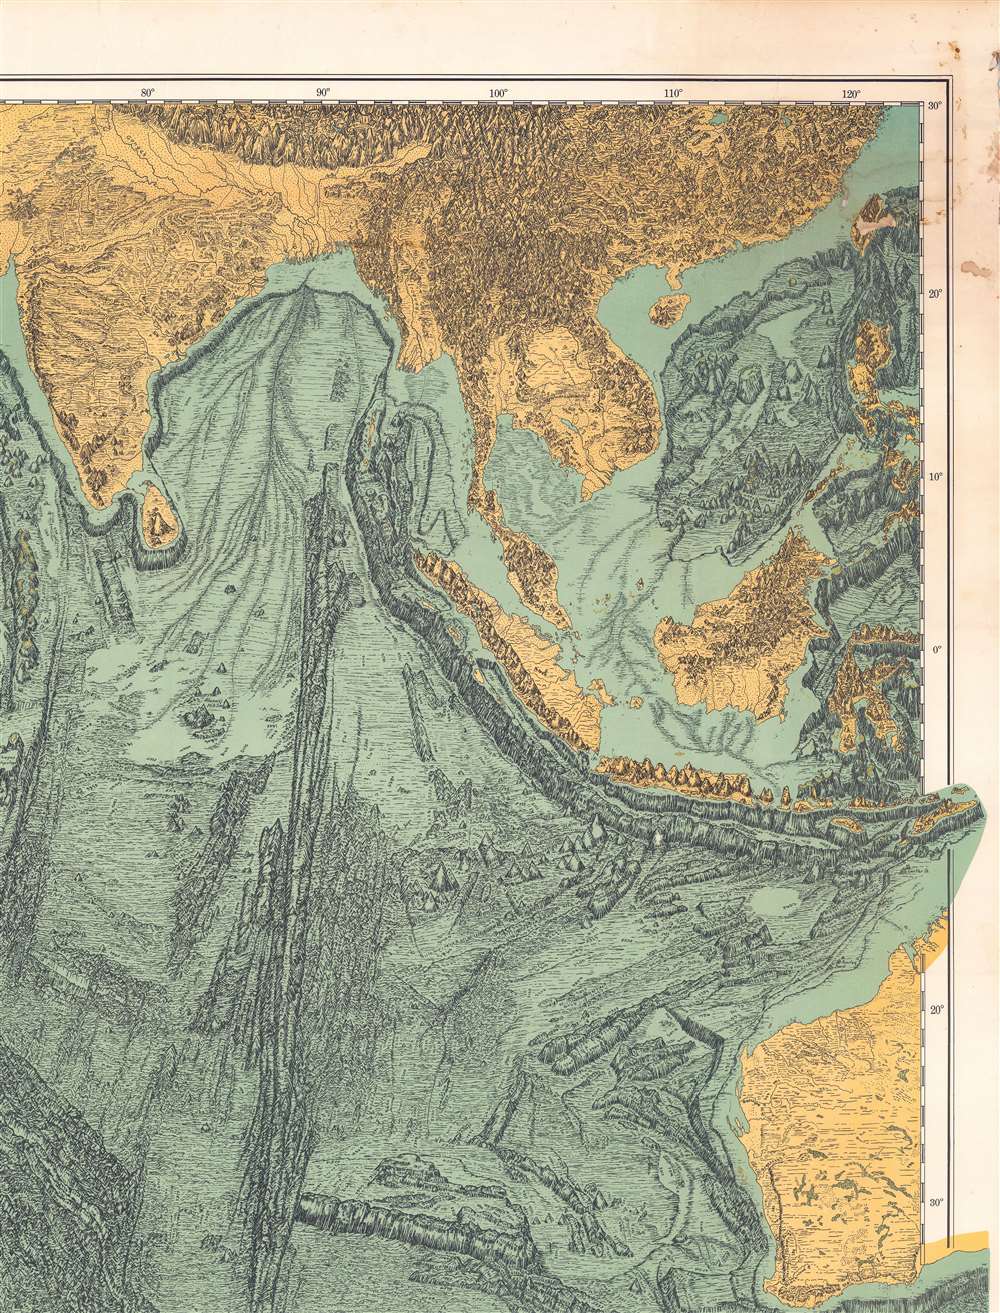 Physiographic Diagram of the Indian Ocean.  The Red Sea, the South China Sea, the Sulu Sea and the Celebes Sea. - Alternate View 3